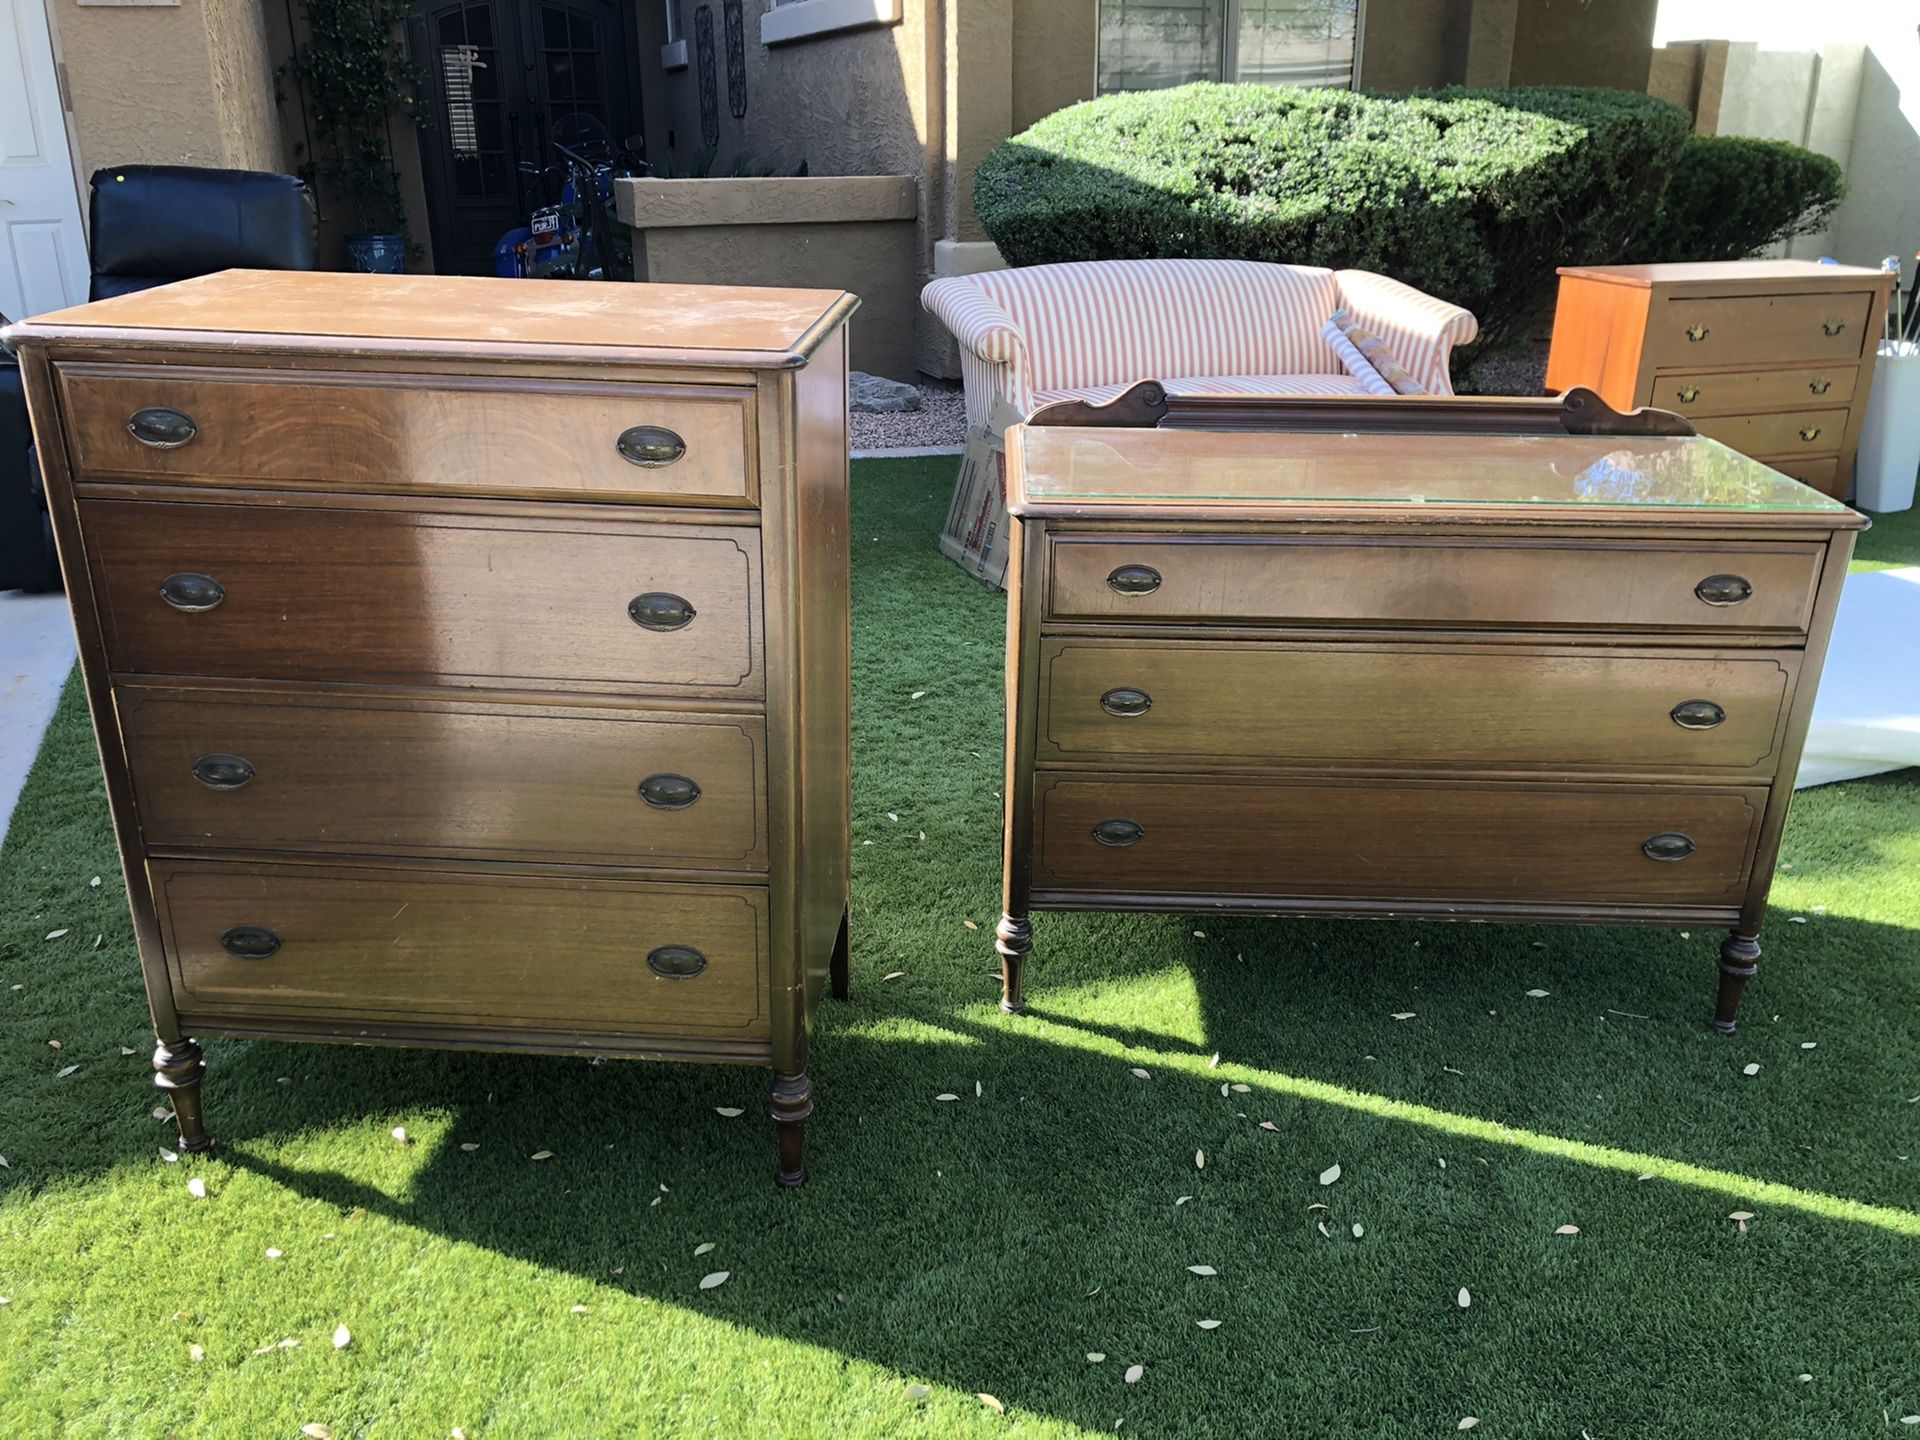 Two Antique dressers